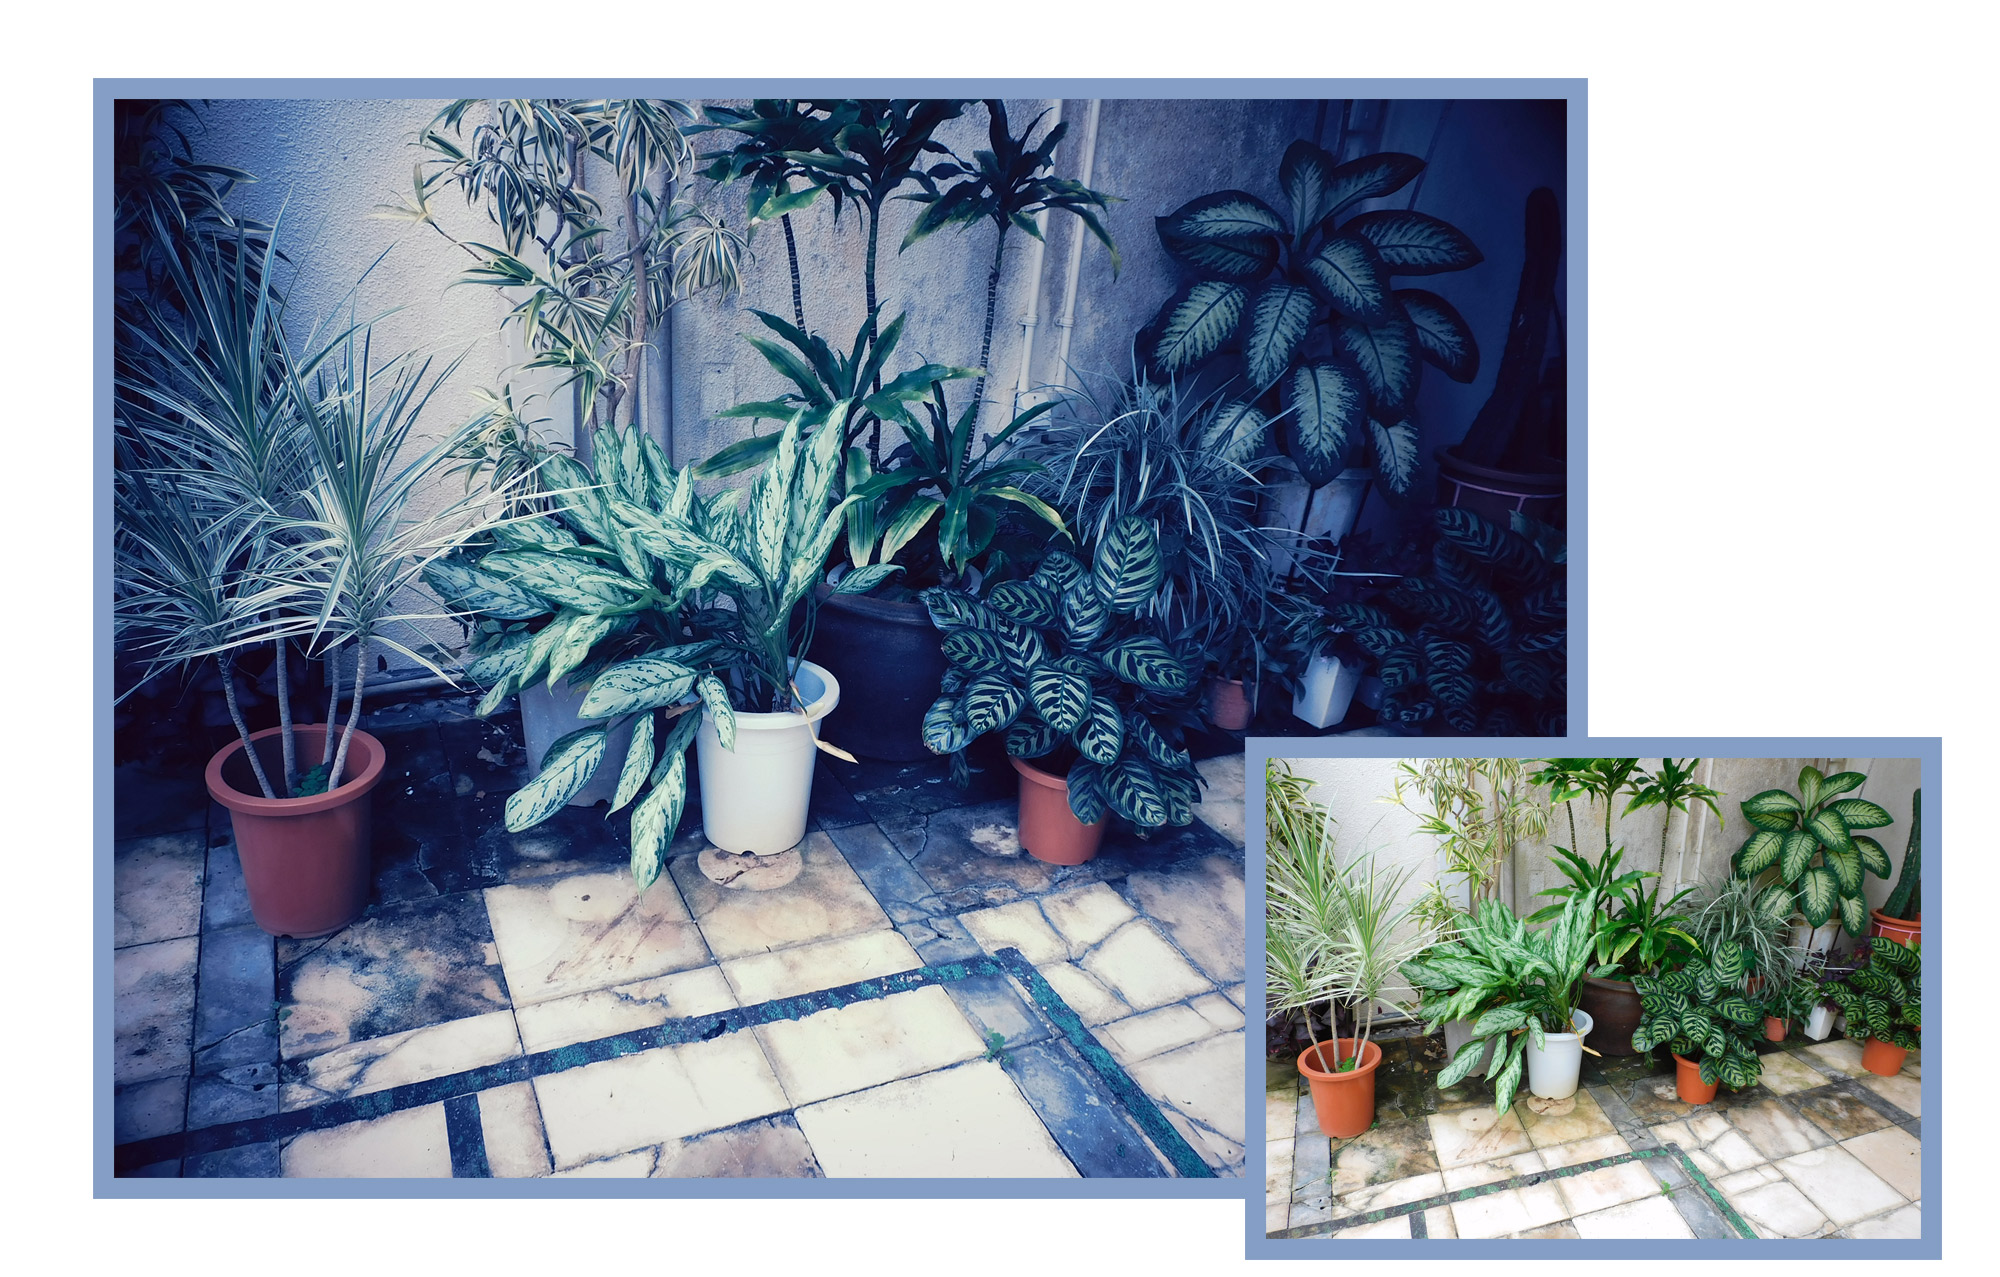 Nikon COOLPIX B600 photo of plants on a patio, with a creative effect, inset with the original photo